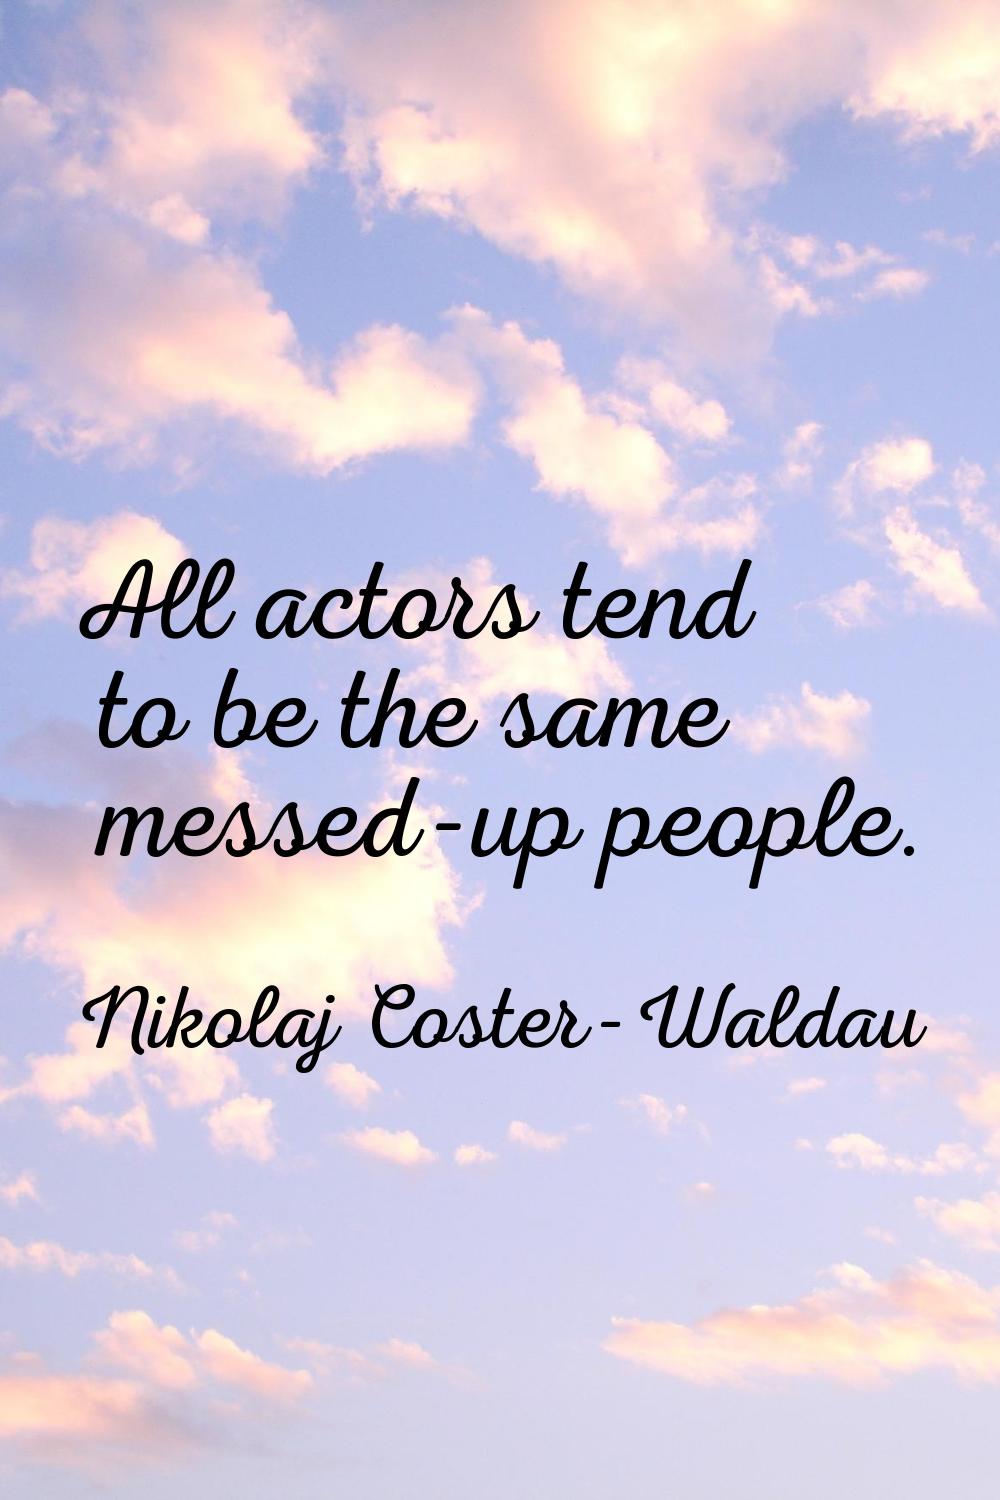 All actors tend to be the same messed-up people.